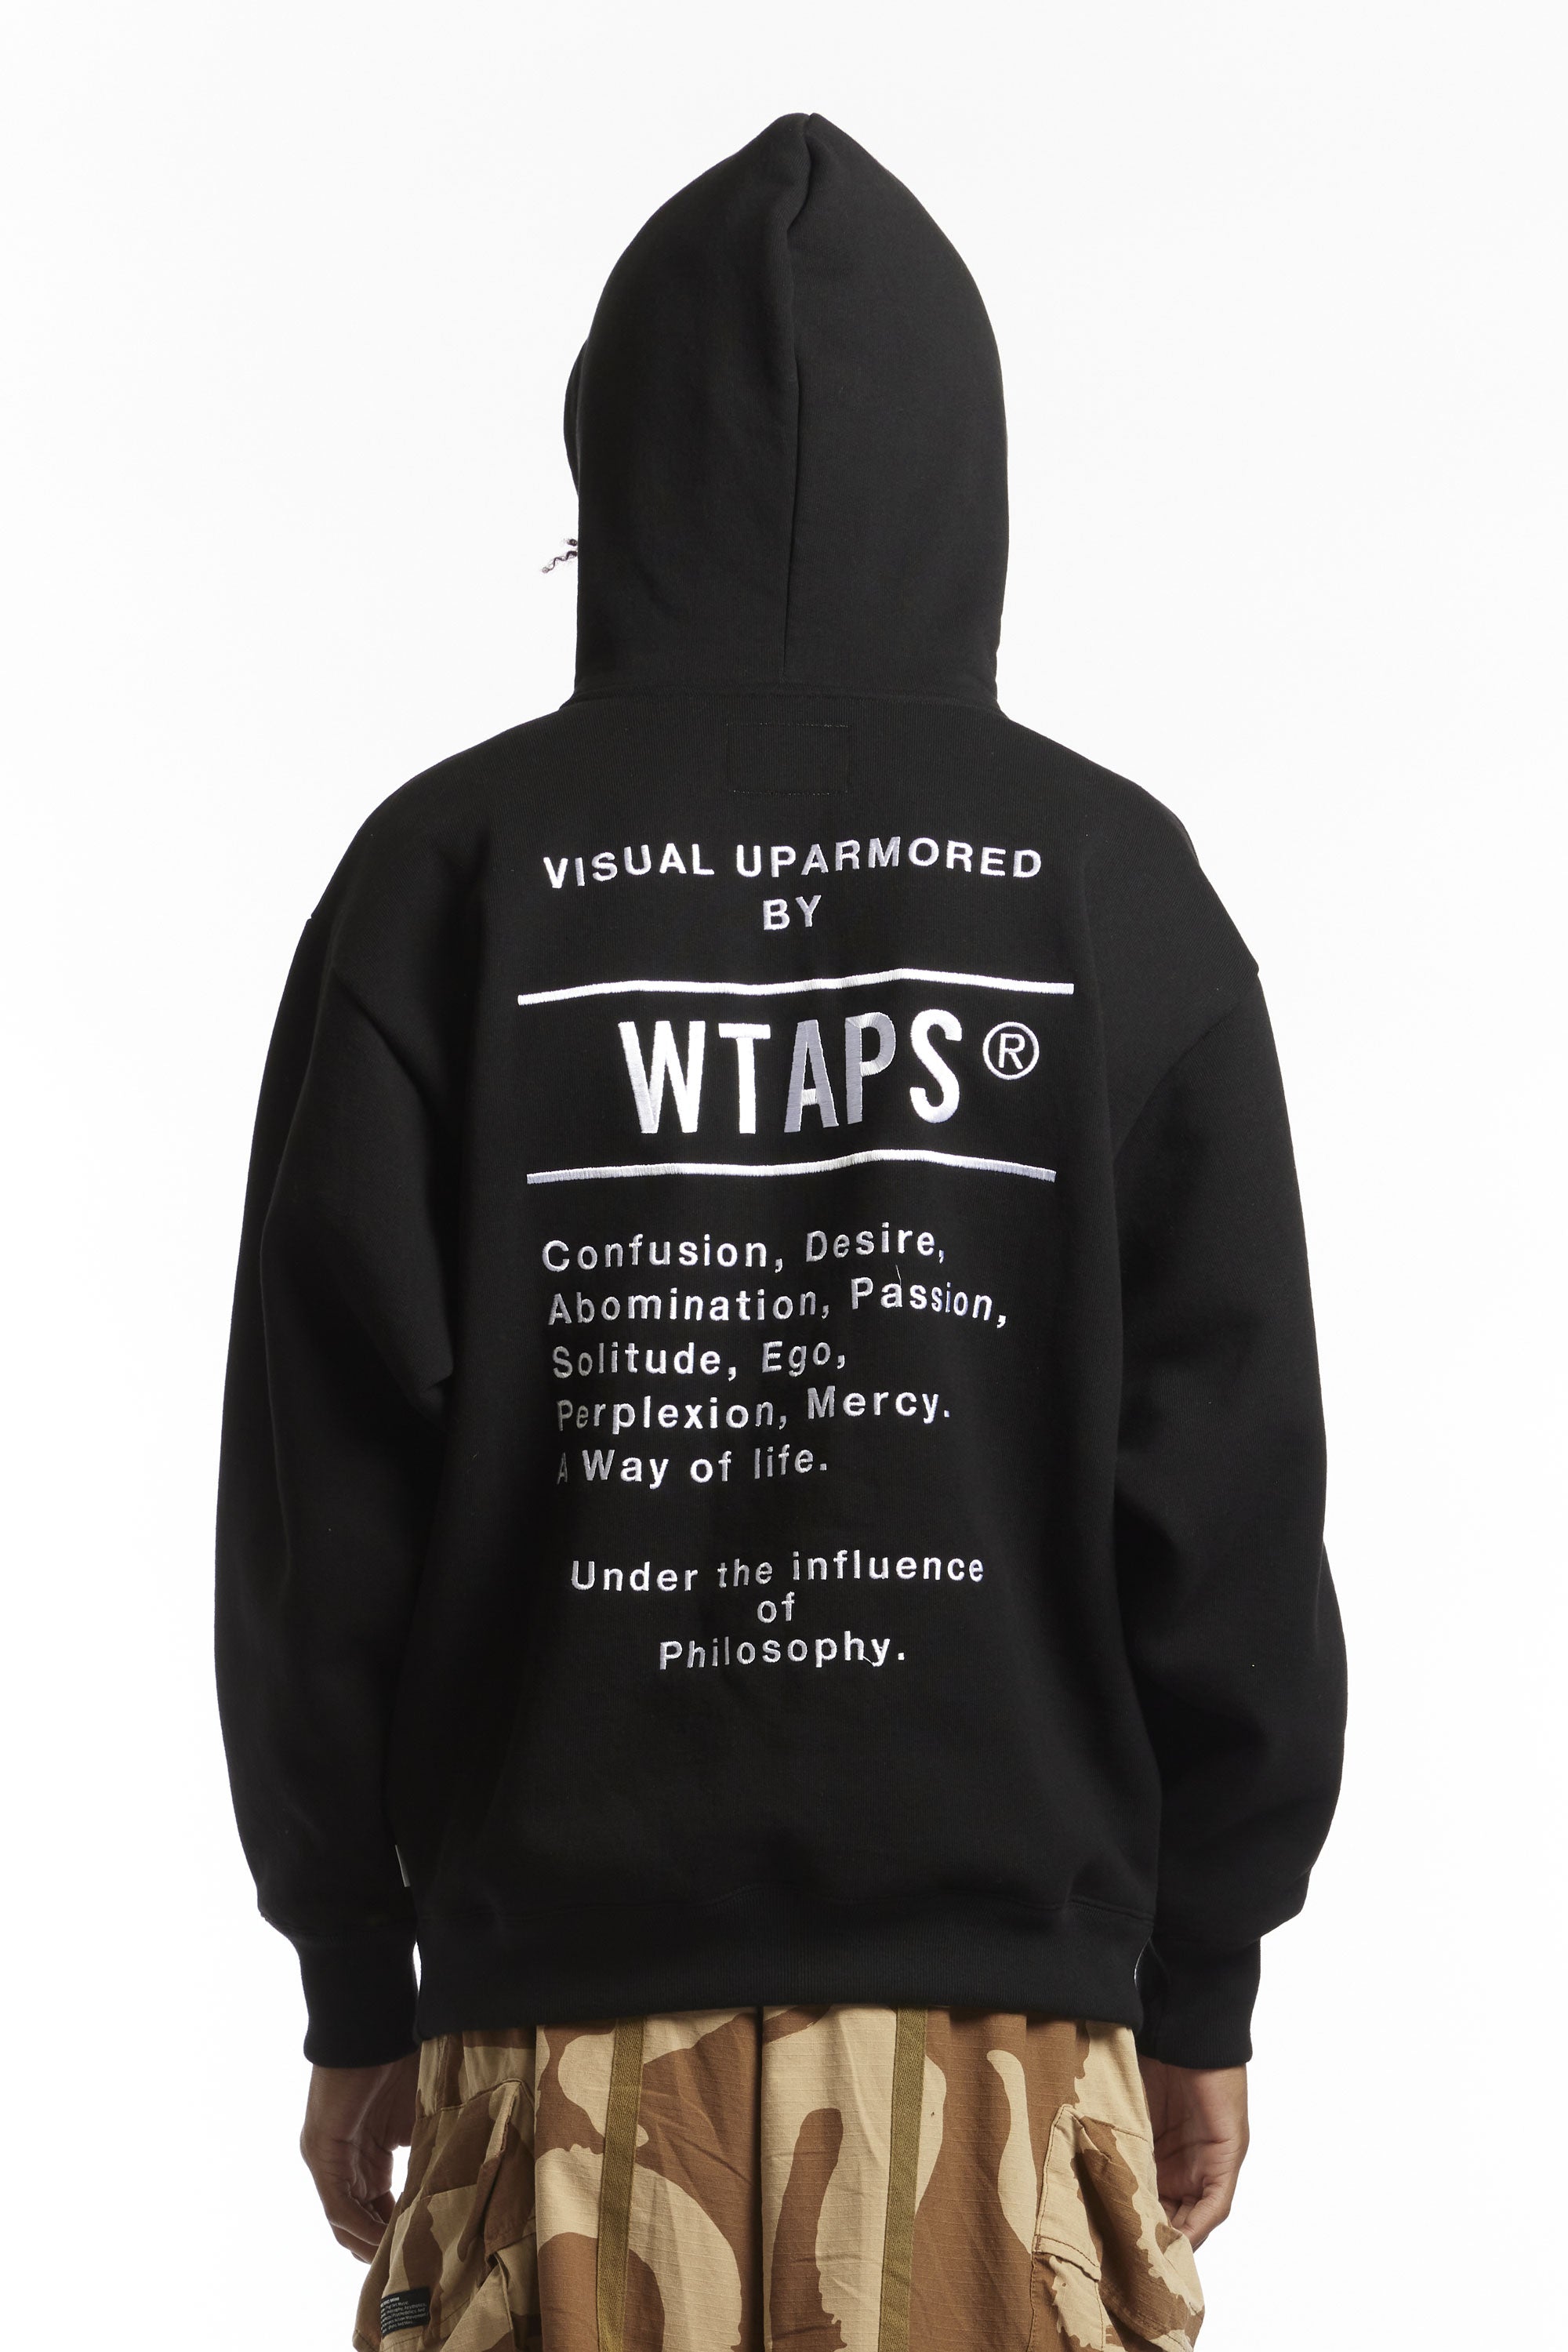 The WTAPS - OBJ 06 HOODED SWEATSHIRT  available online with global shipping, and in PAM Stores Melbourne and Sydney.